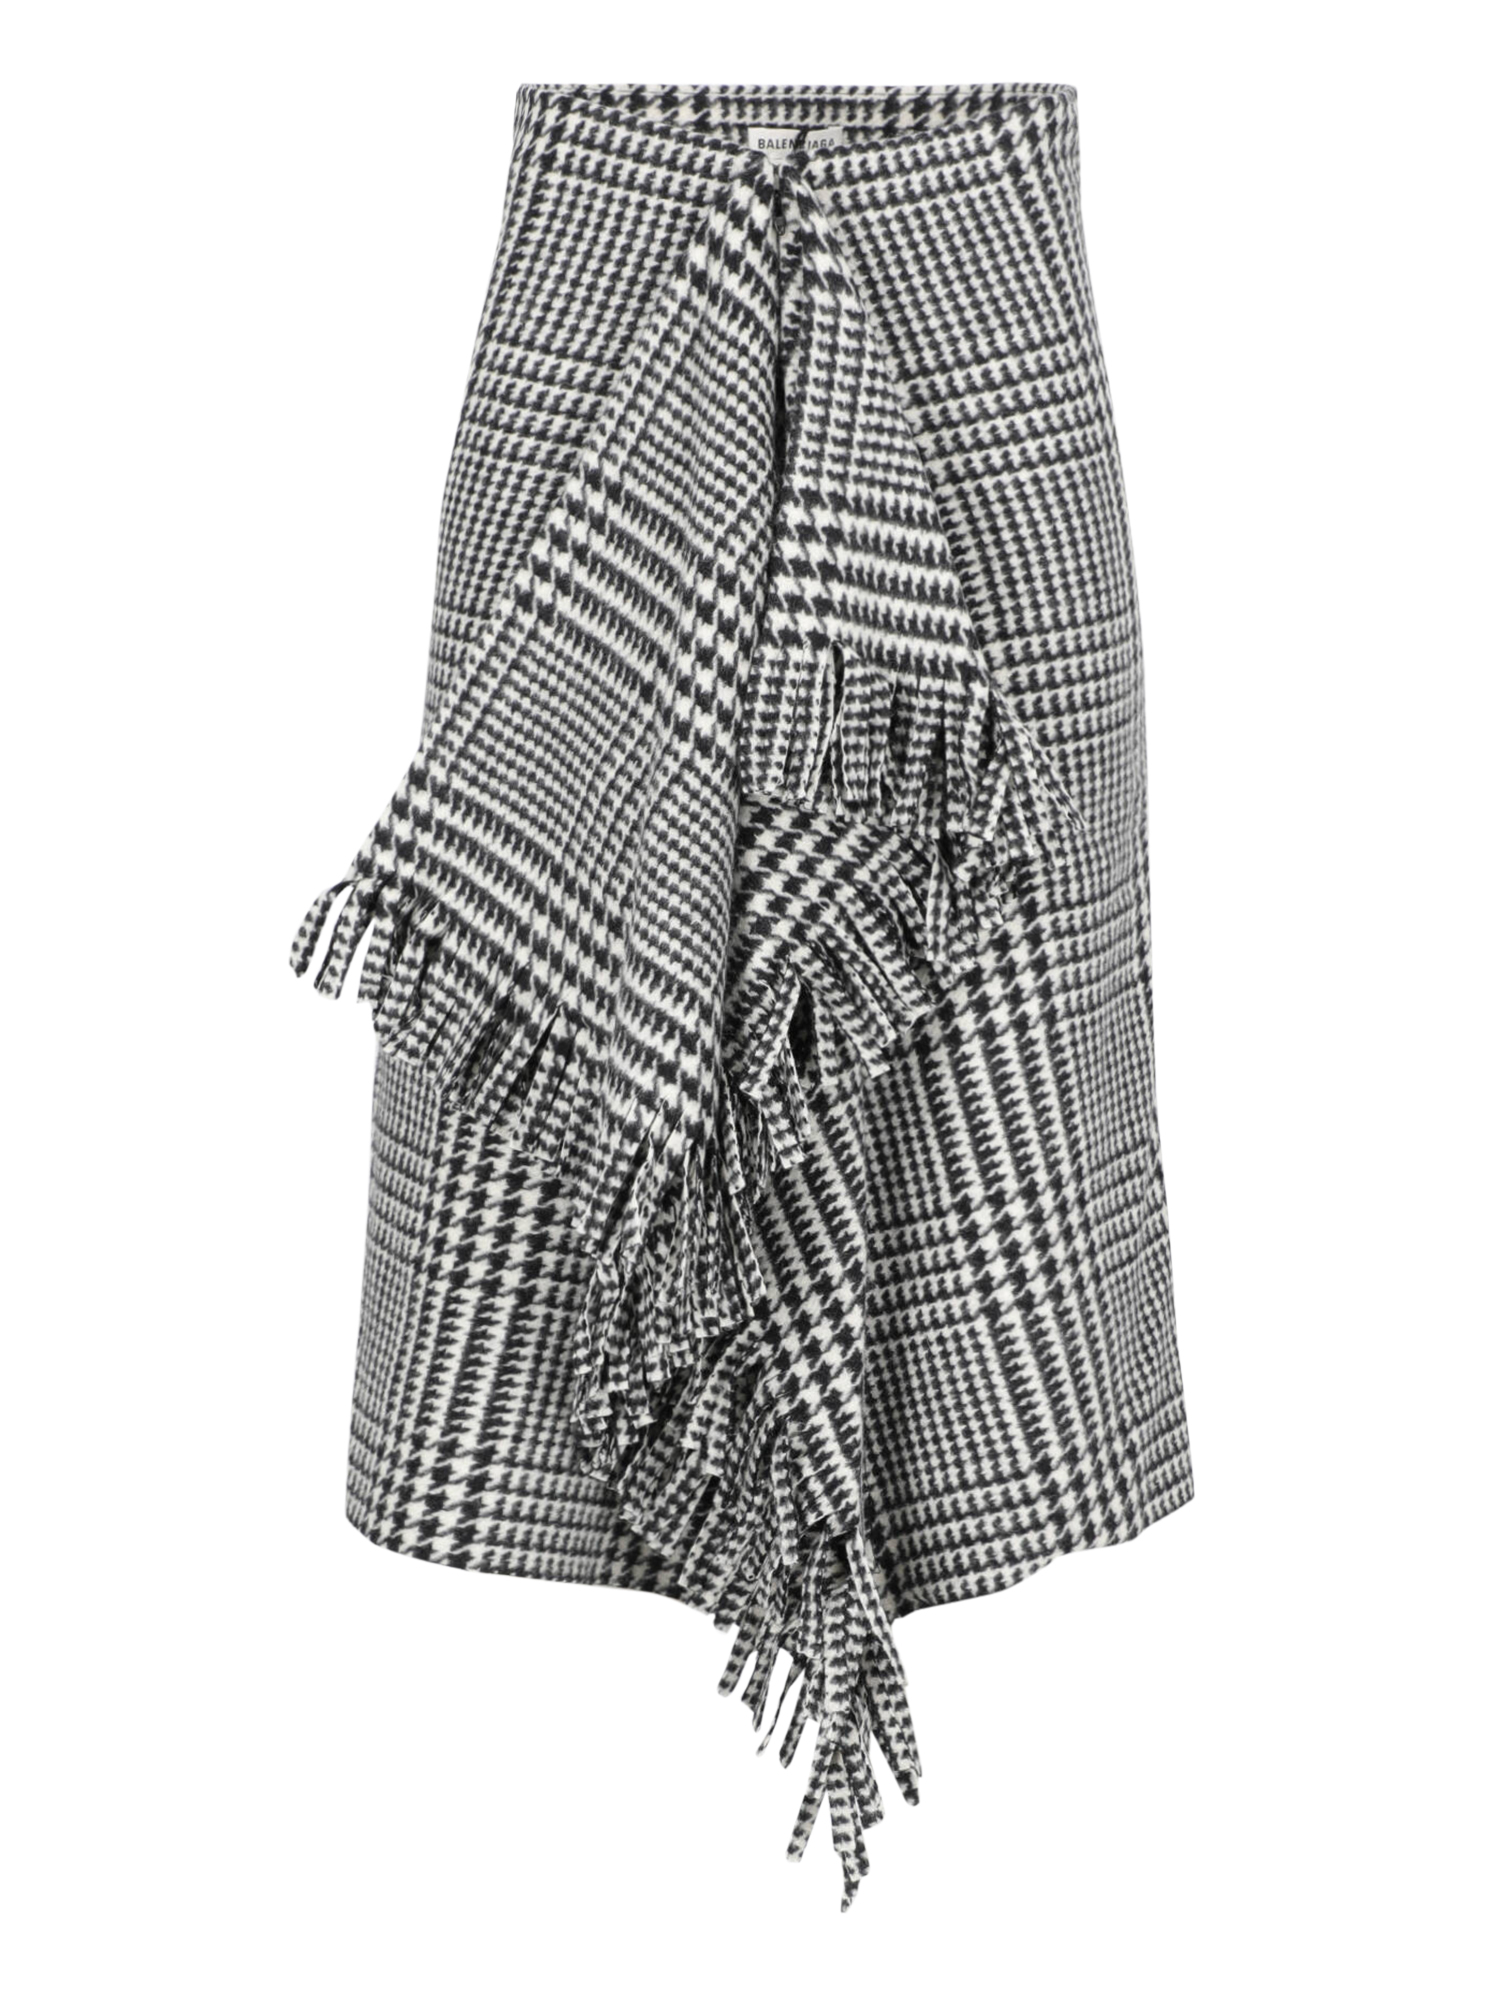 Condition: Excellent, Houndstooth Wool, Color: Black, White - XS - FR 34 -